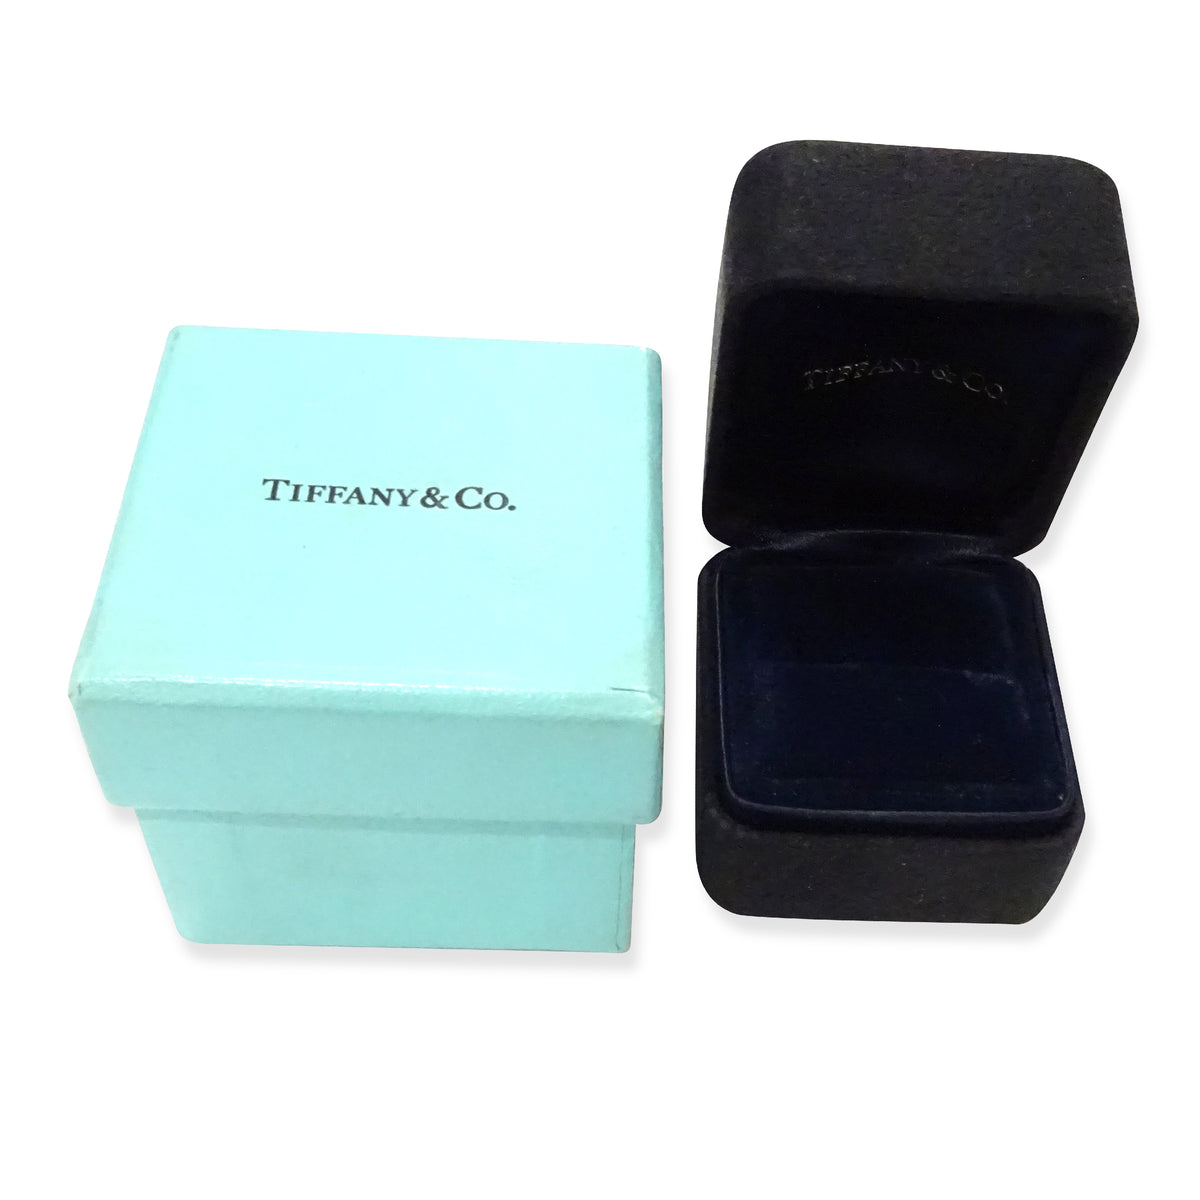 Tiffany & Co. Solitaire Diamond Engagement Ring in  Platinum (0.21 ct F/VS1)